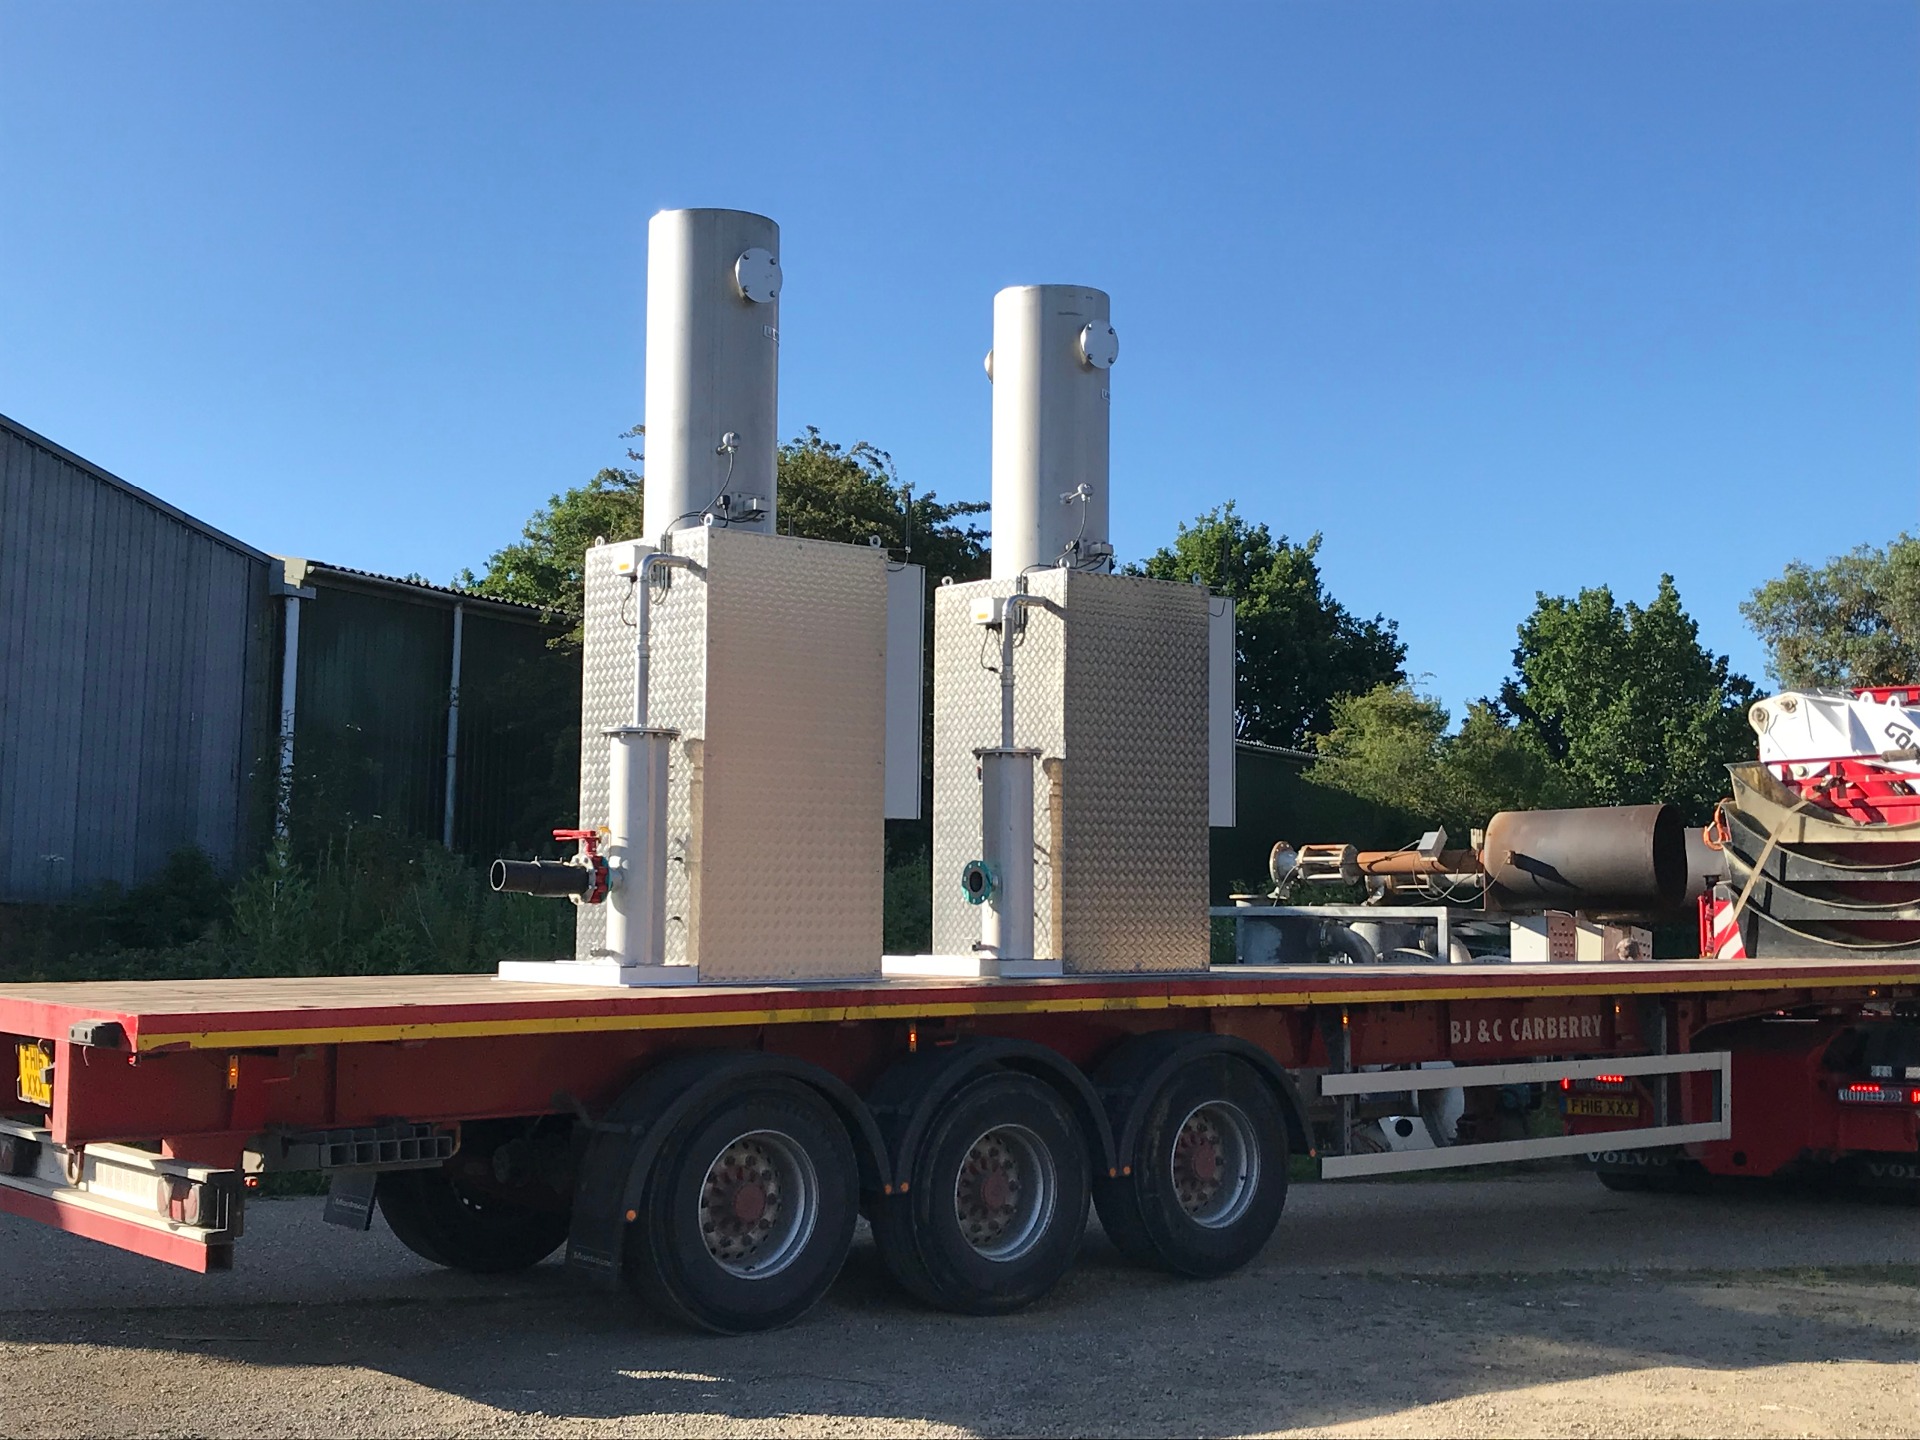 Low Calorie biogas flares ready for delivery